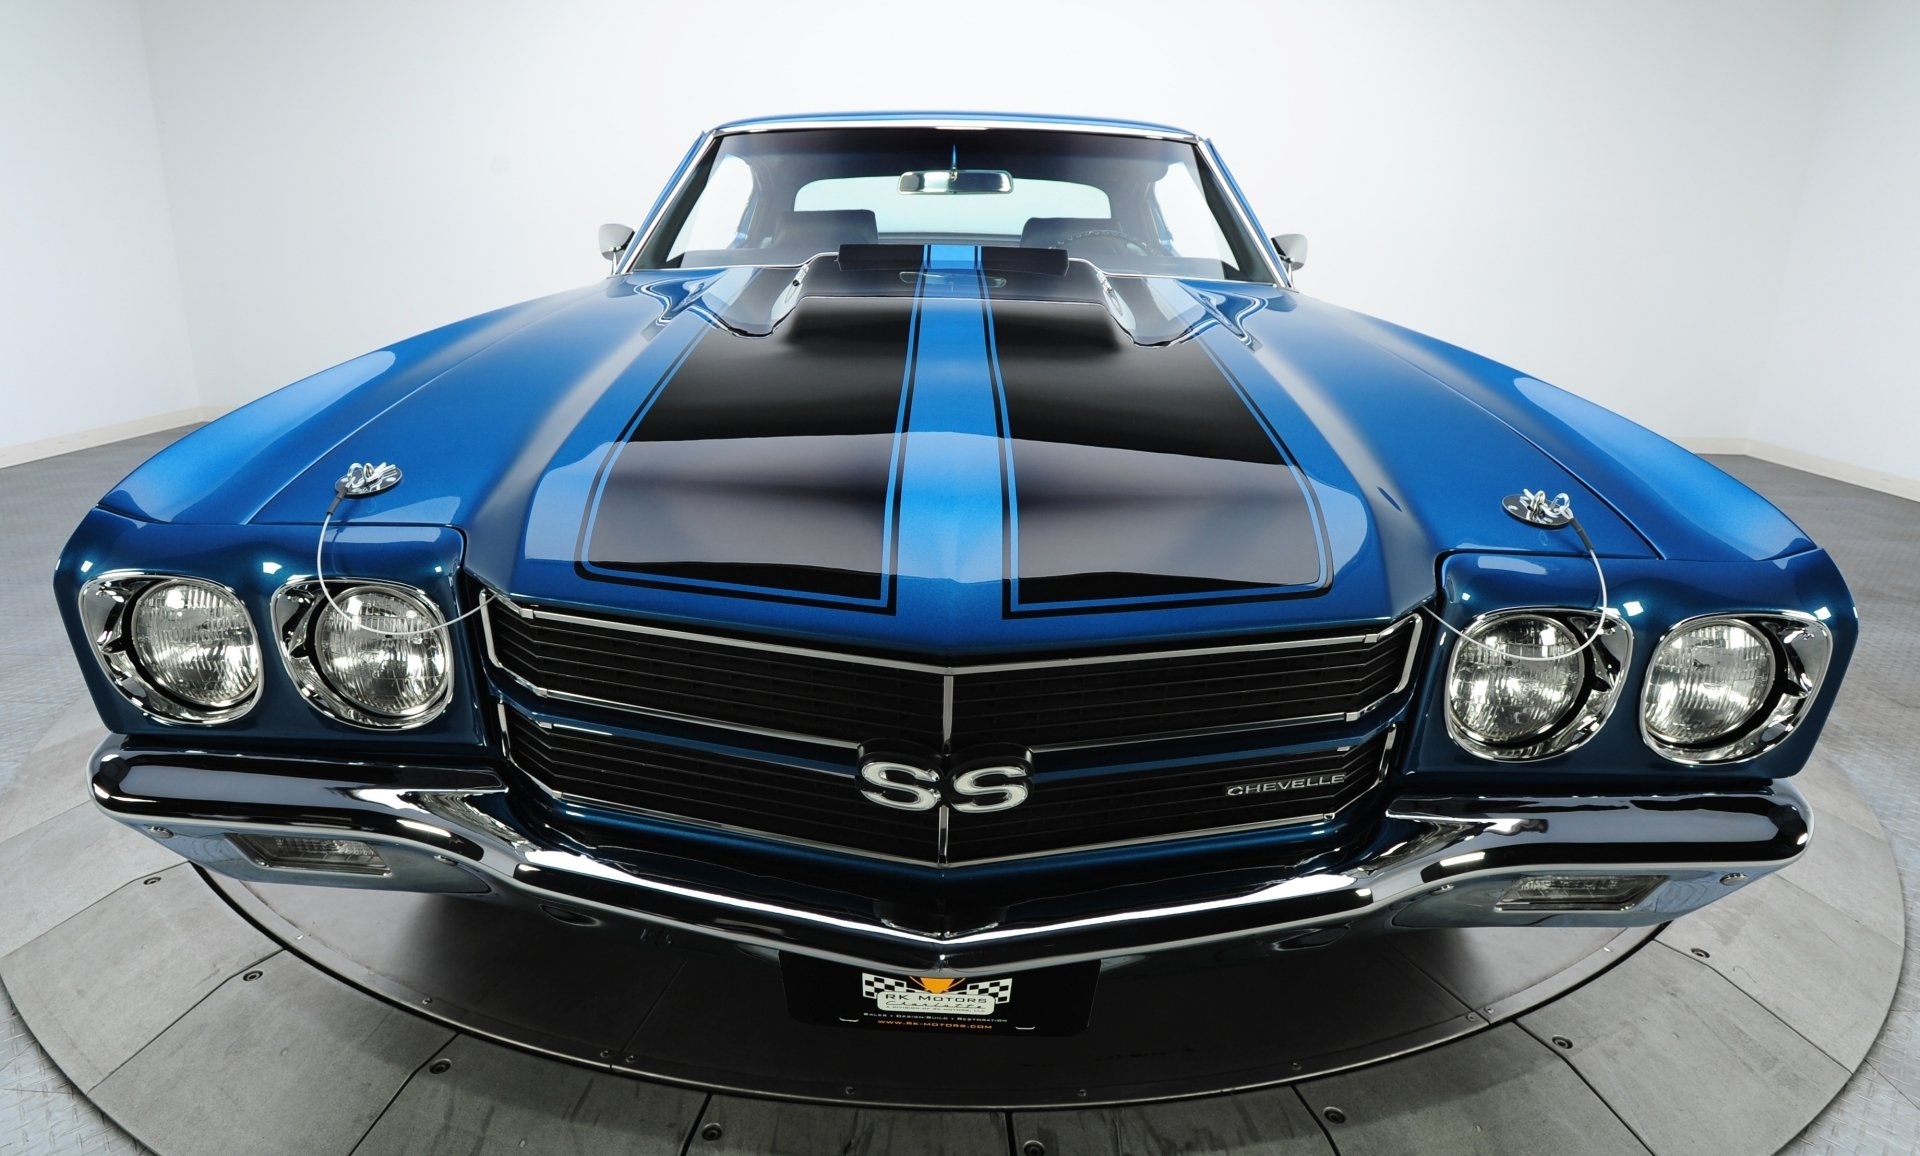 Chevrolet Chevelle SS, High-definition imagery, Classic design, Muscle power, Car enthusiasts, 1920x1160 HD Desktop